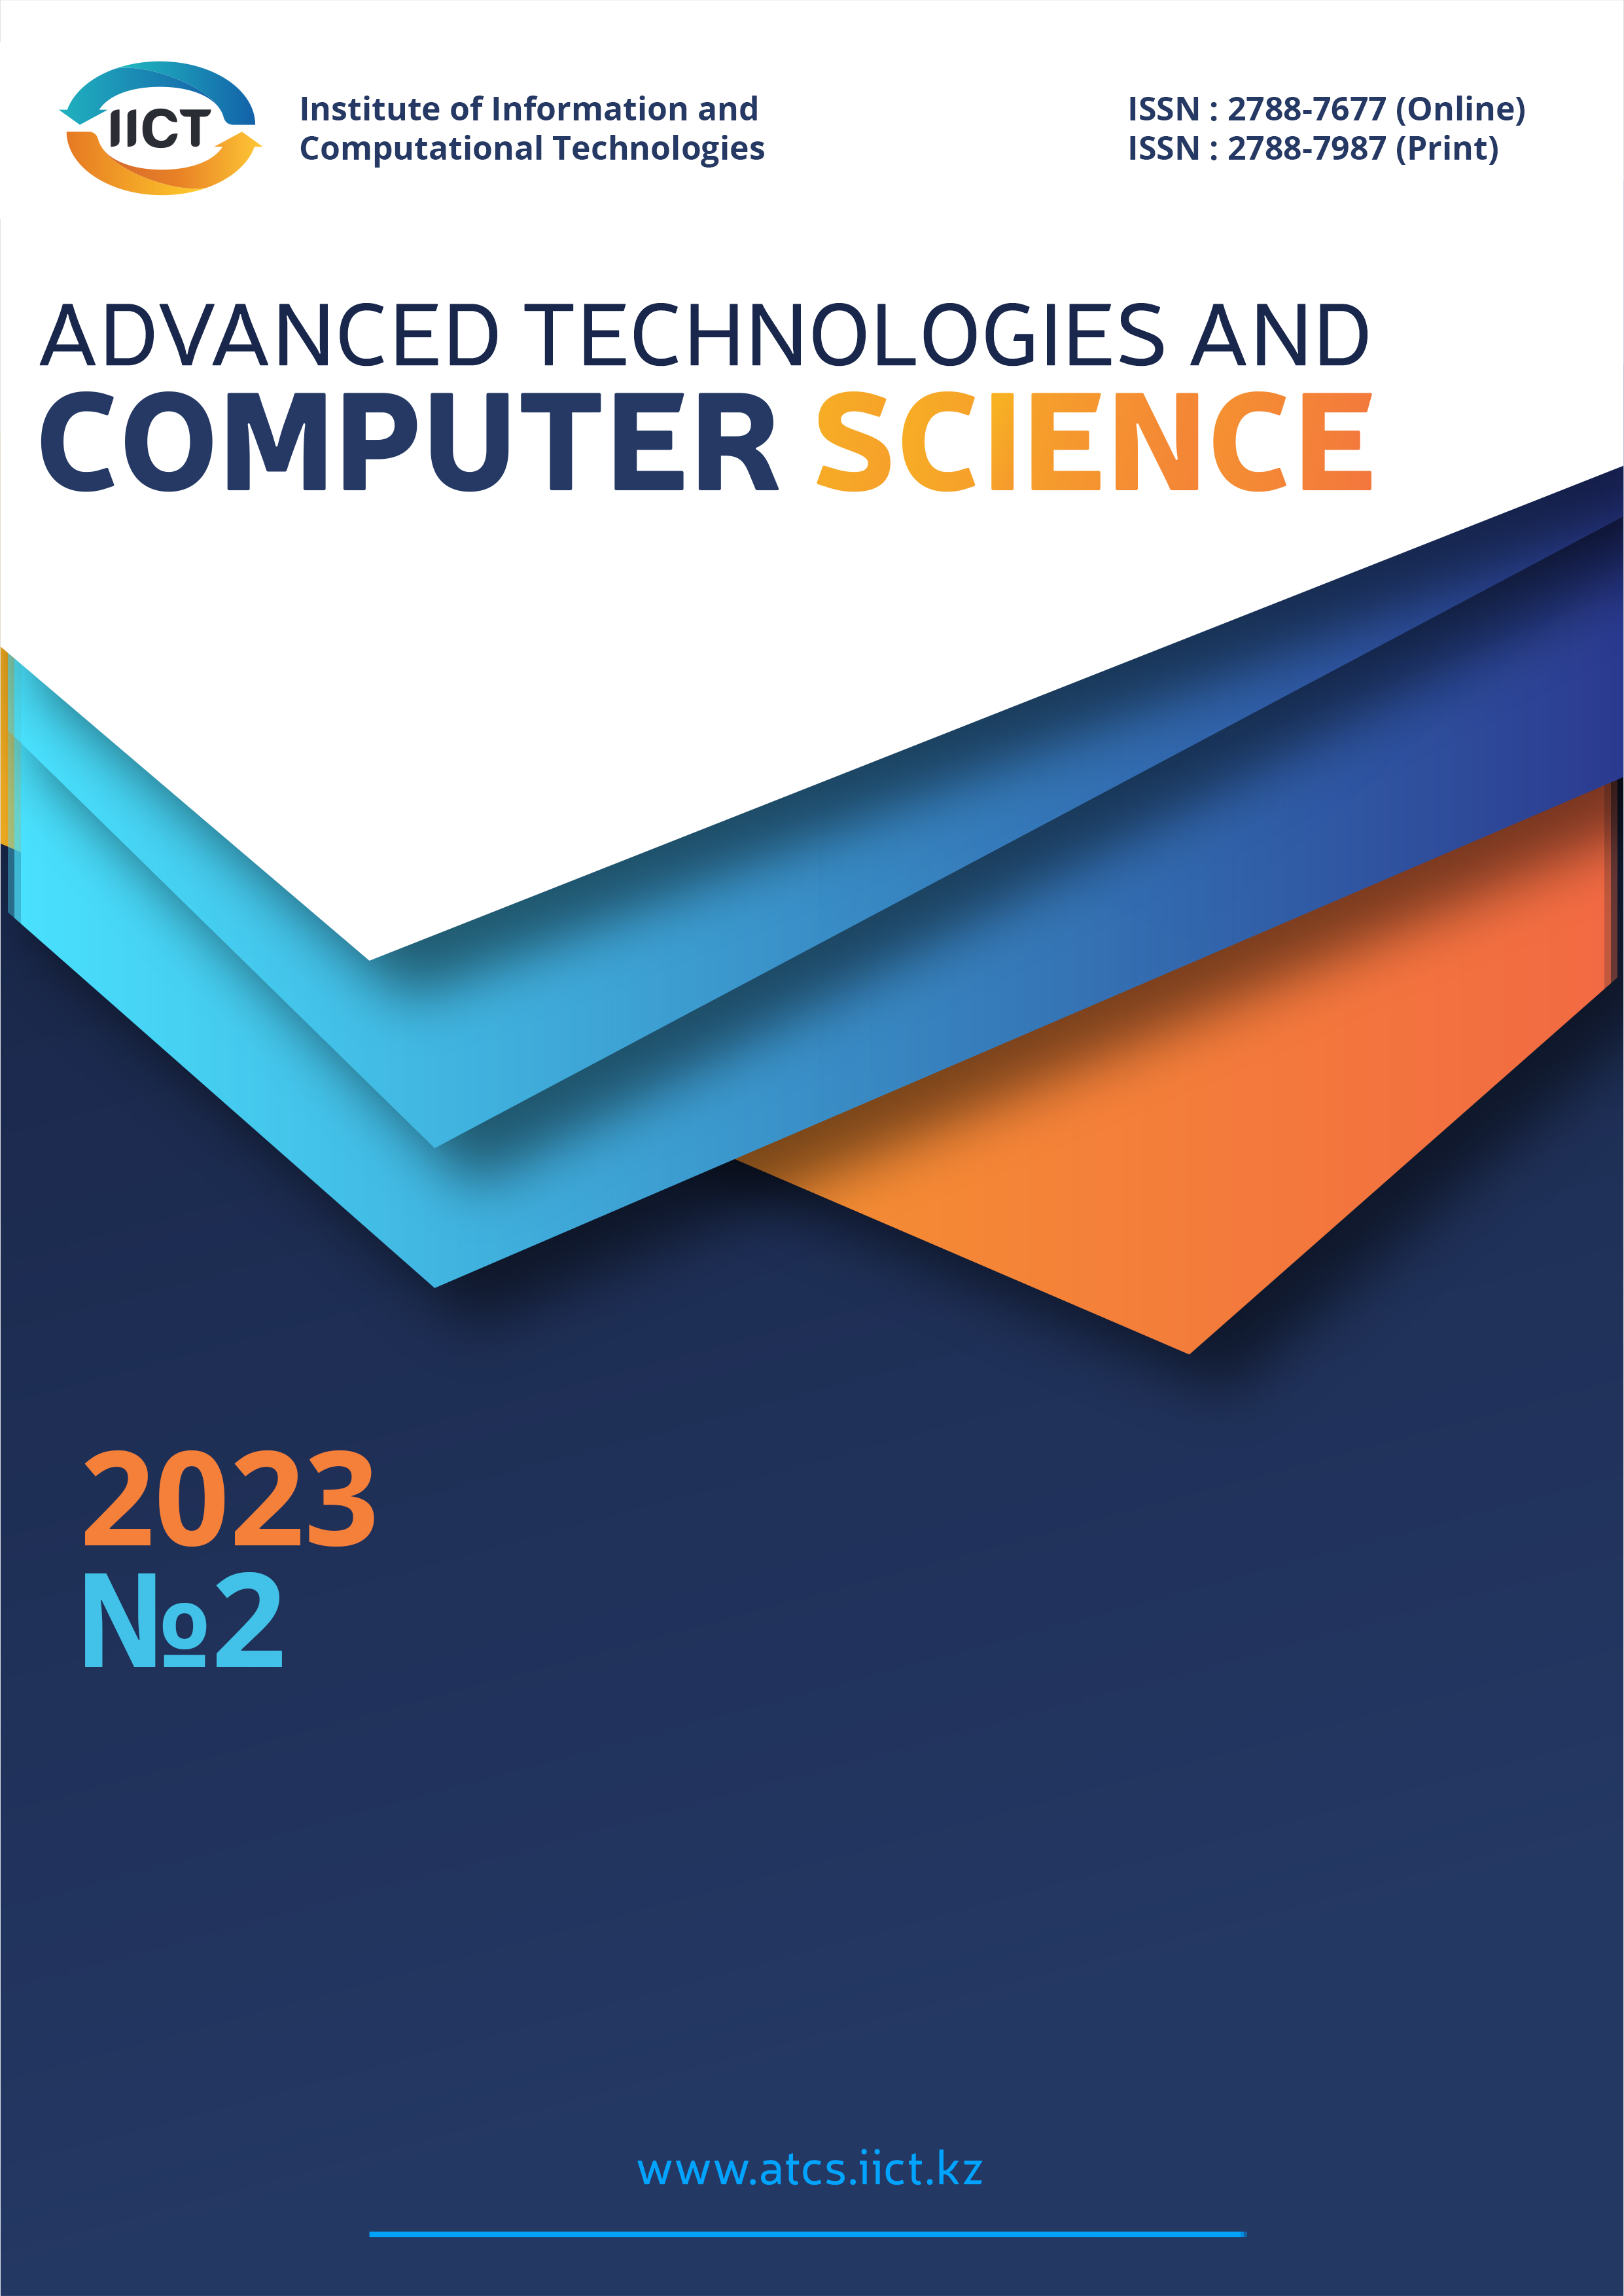 					View Vol. 1 No. 2 (2023): ADVANCED TECHNOLOGIES AND COMPUTER SCIENCE
				